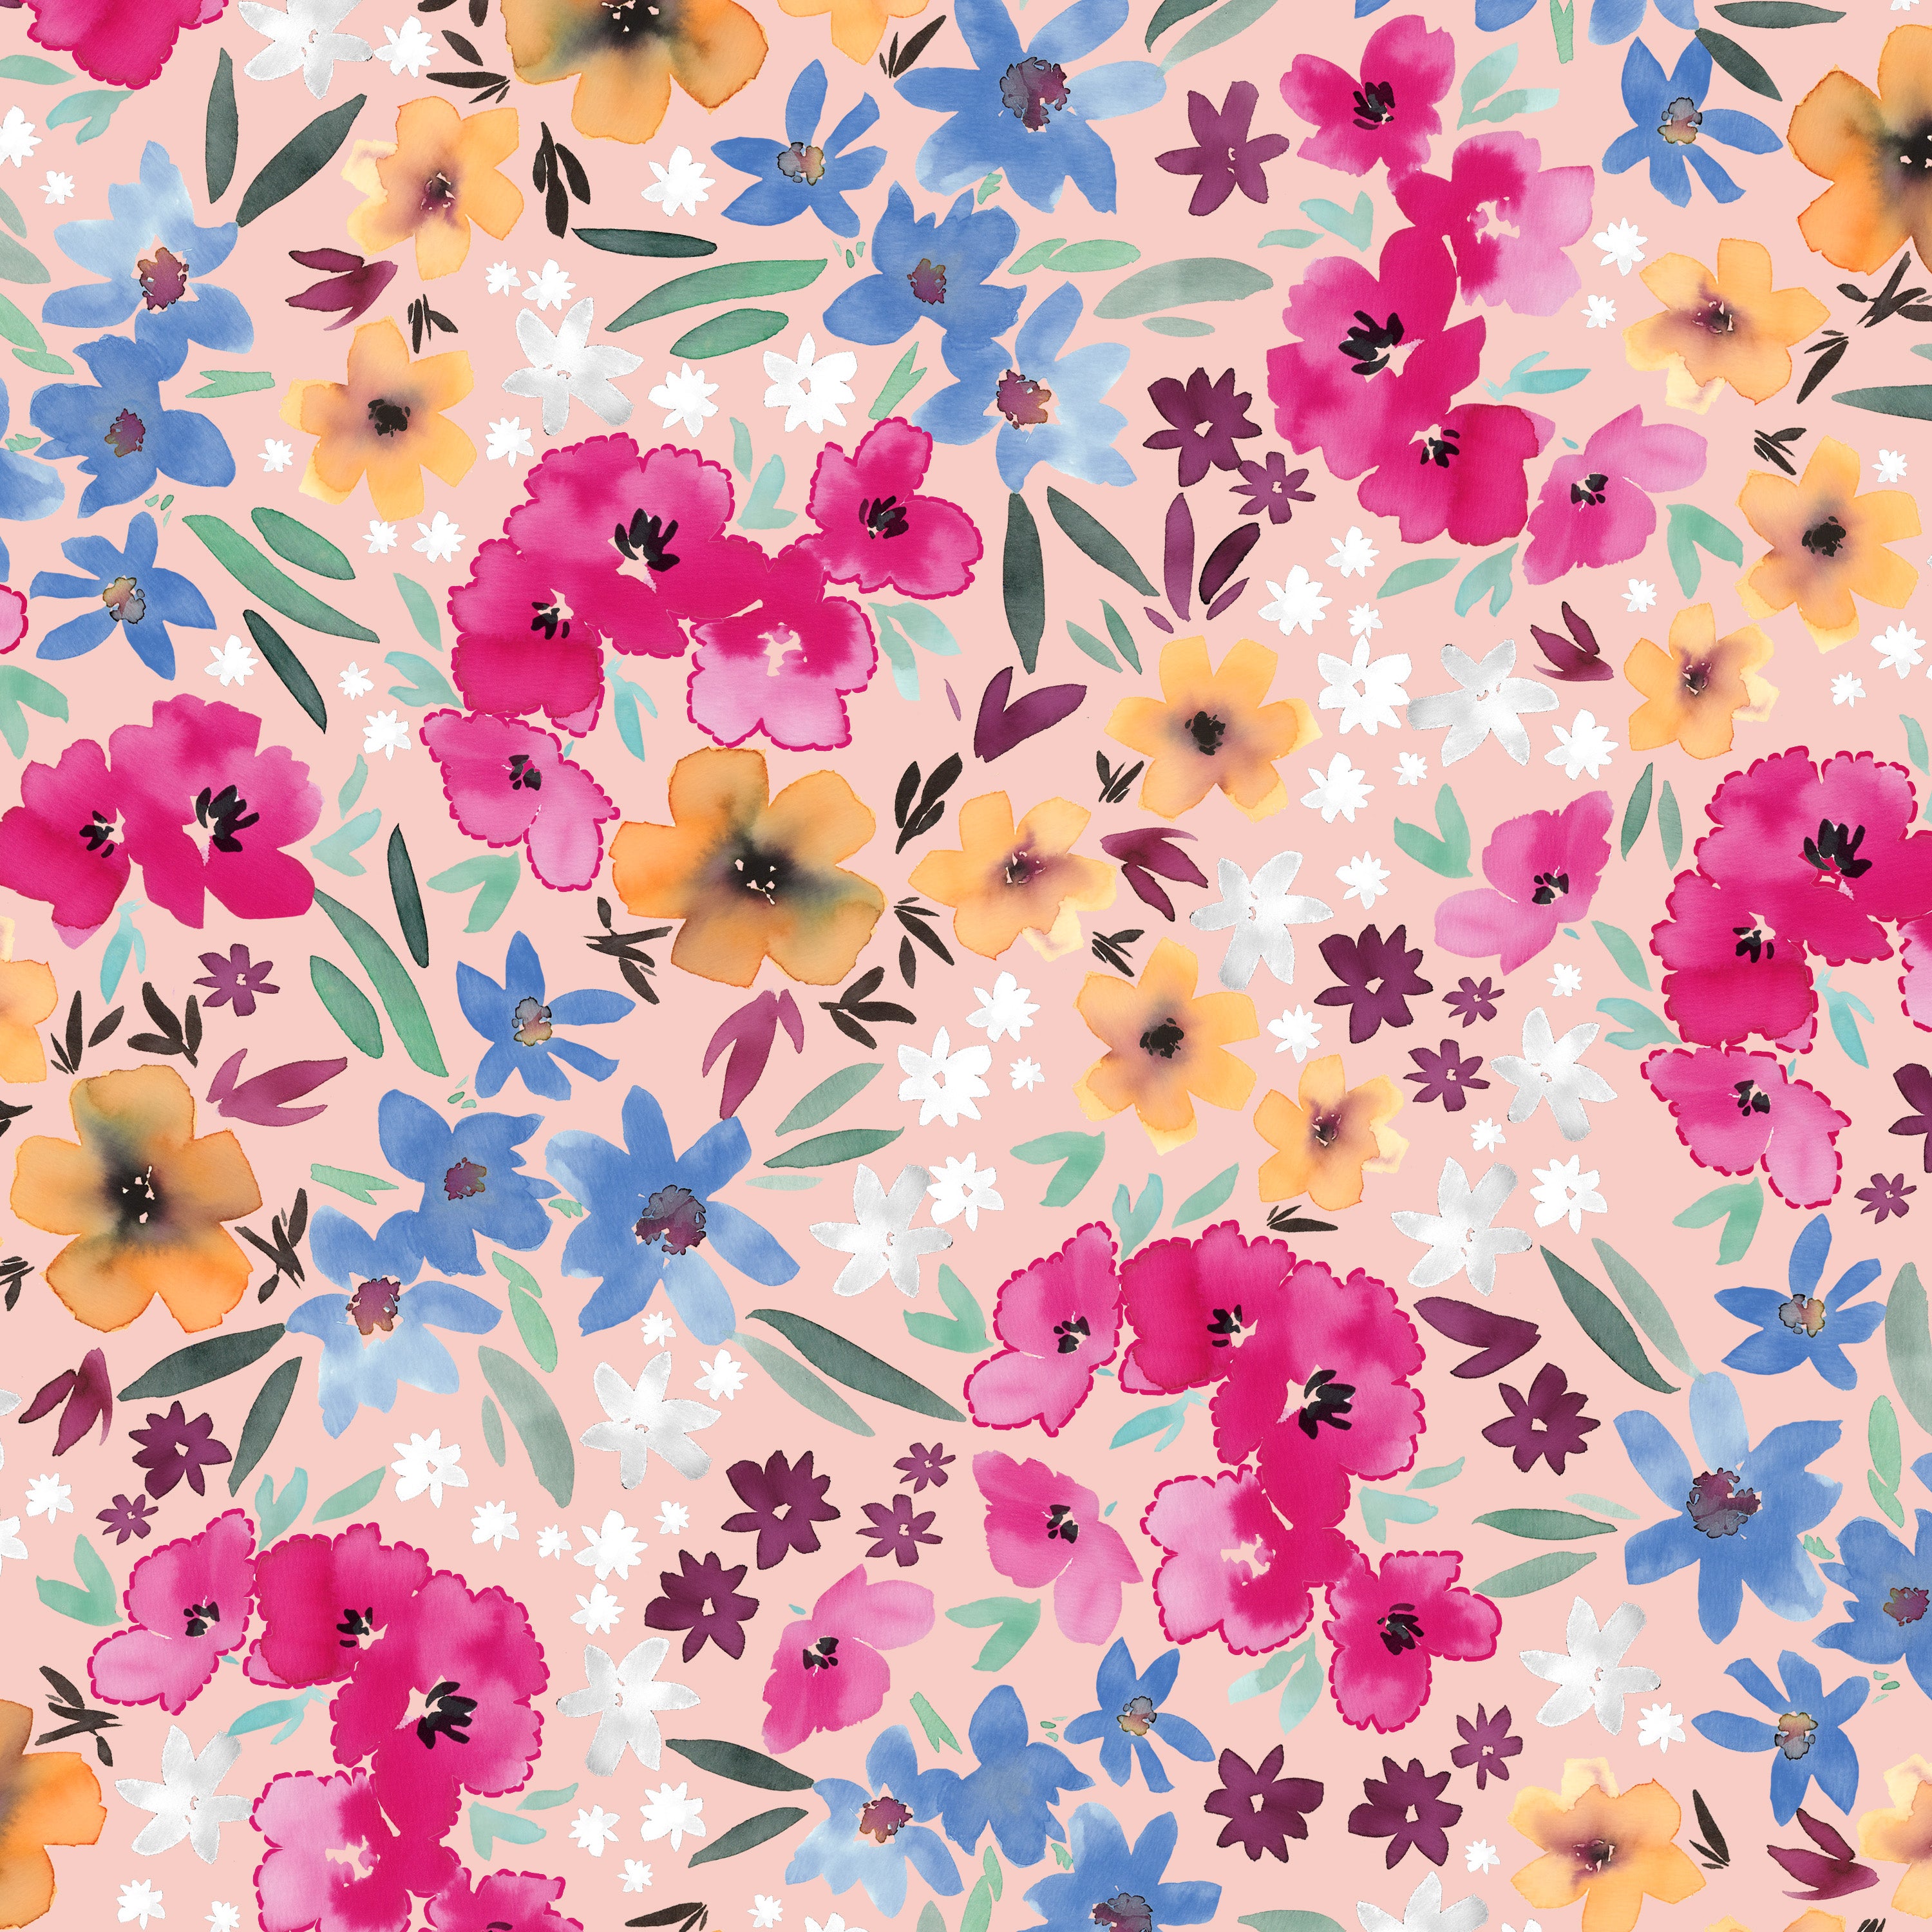 Abstract/Floral Digital Print